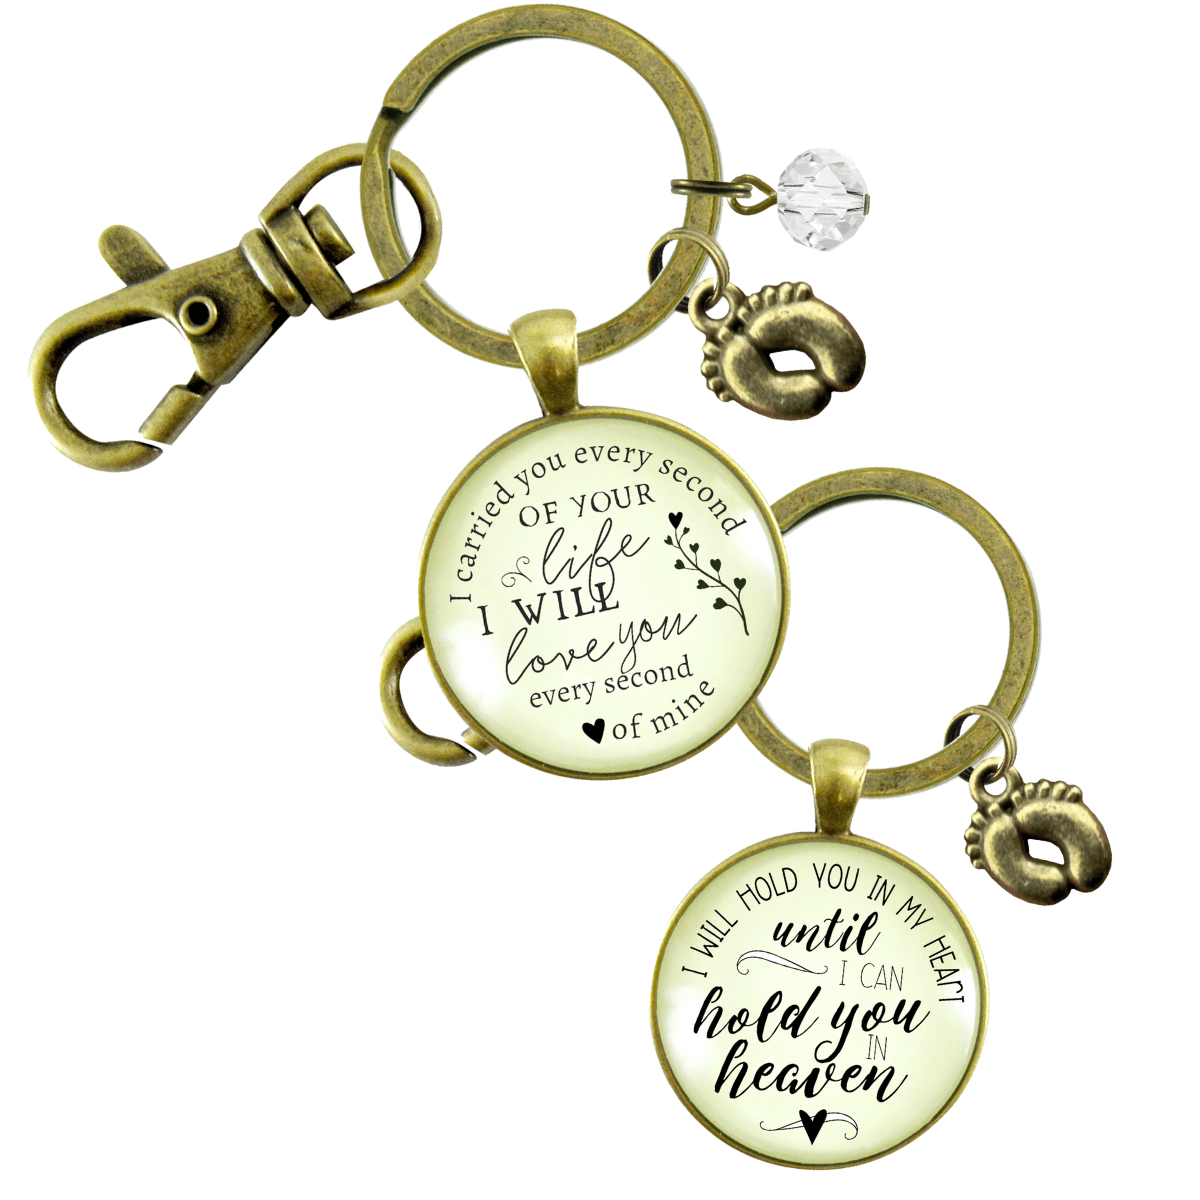 Baby Loss Miscarriage Set of 2 Keychains For Mom & Dad Carried You Hold You Memorial - Gutsy Goodness